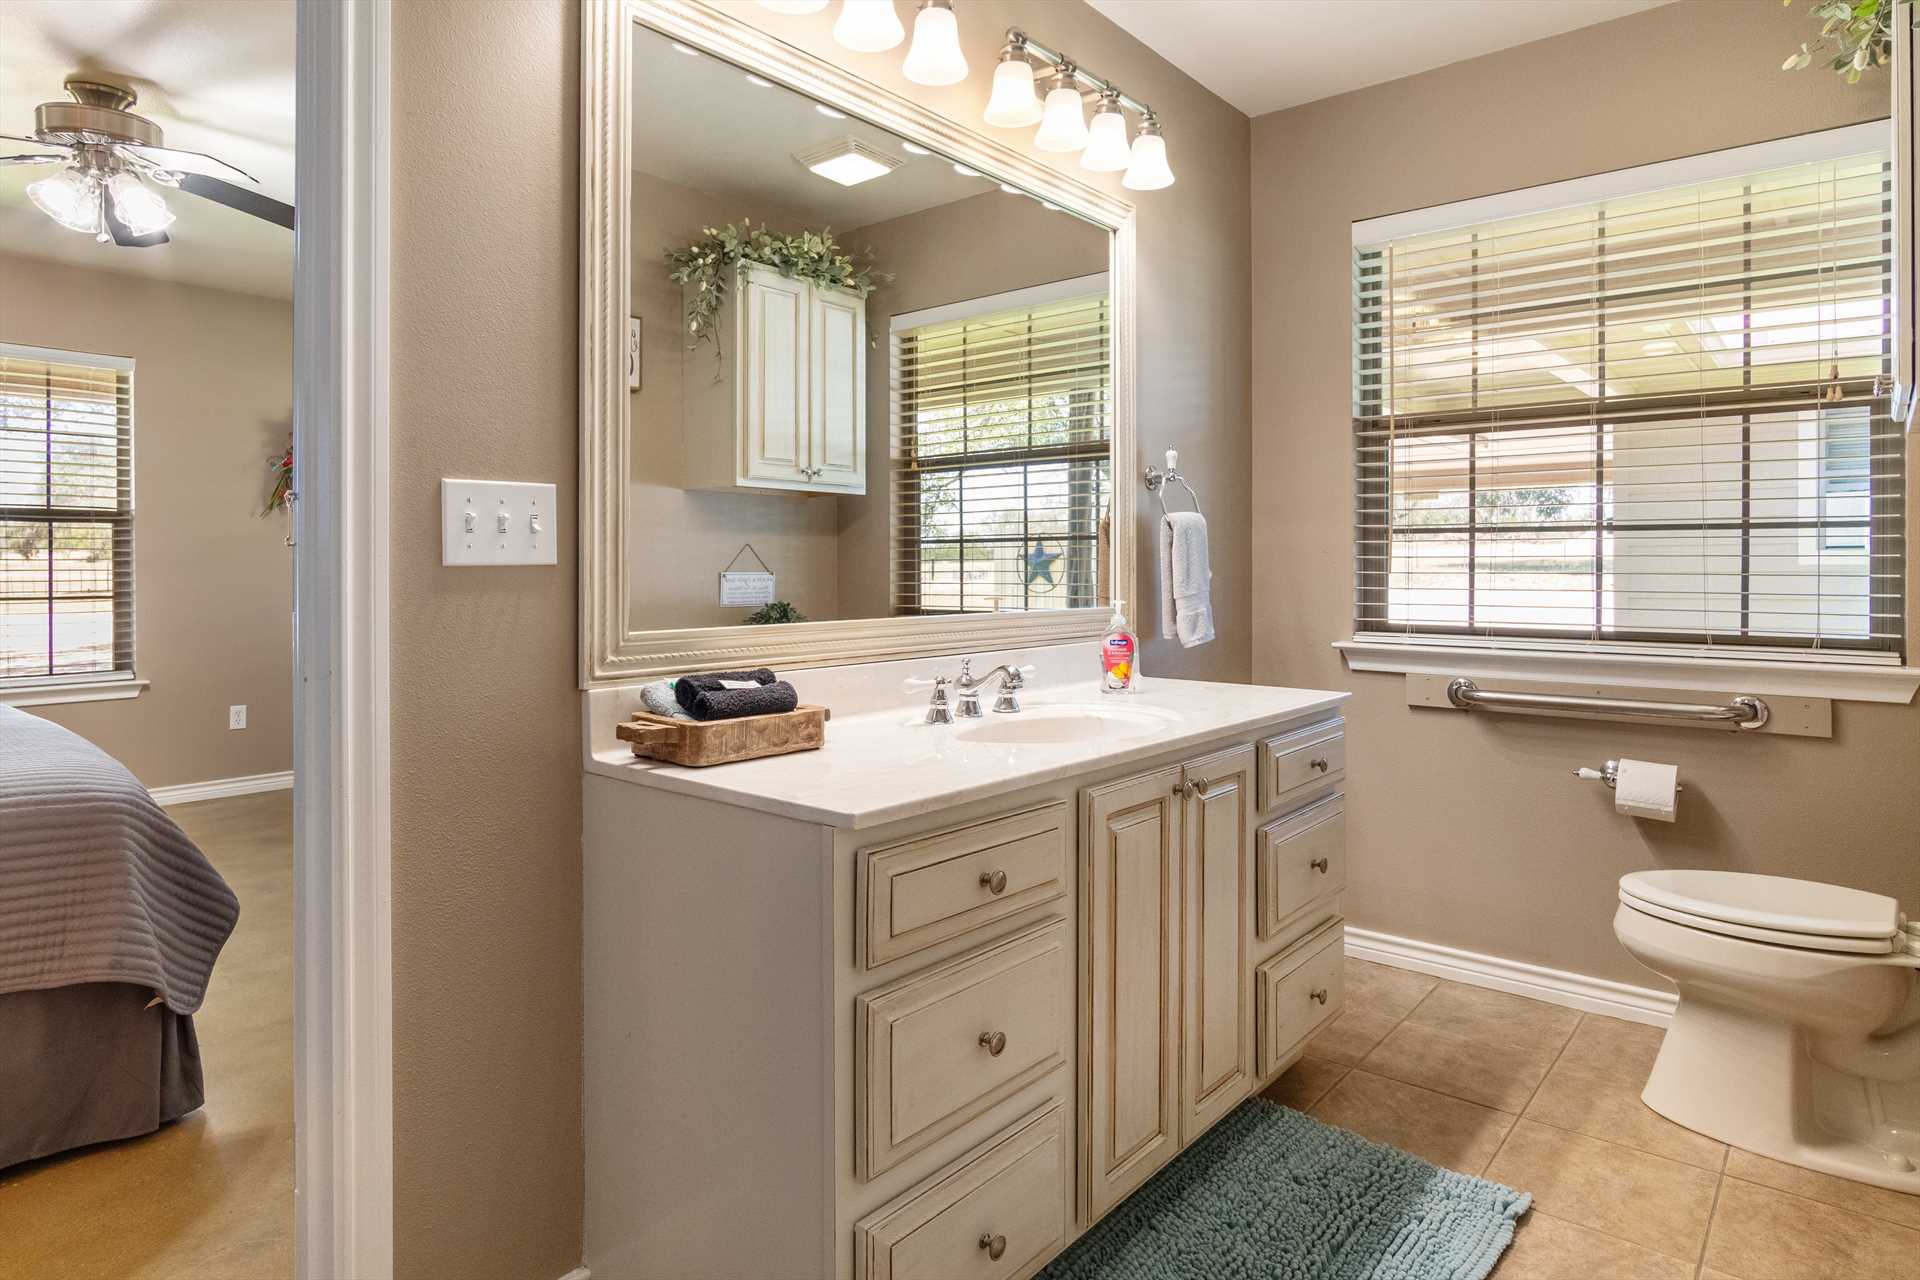                                                 Both full baths here are convenient to the bedrooms, and are decked out in fresh linens, too.